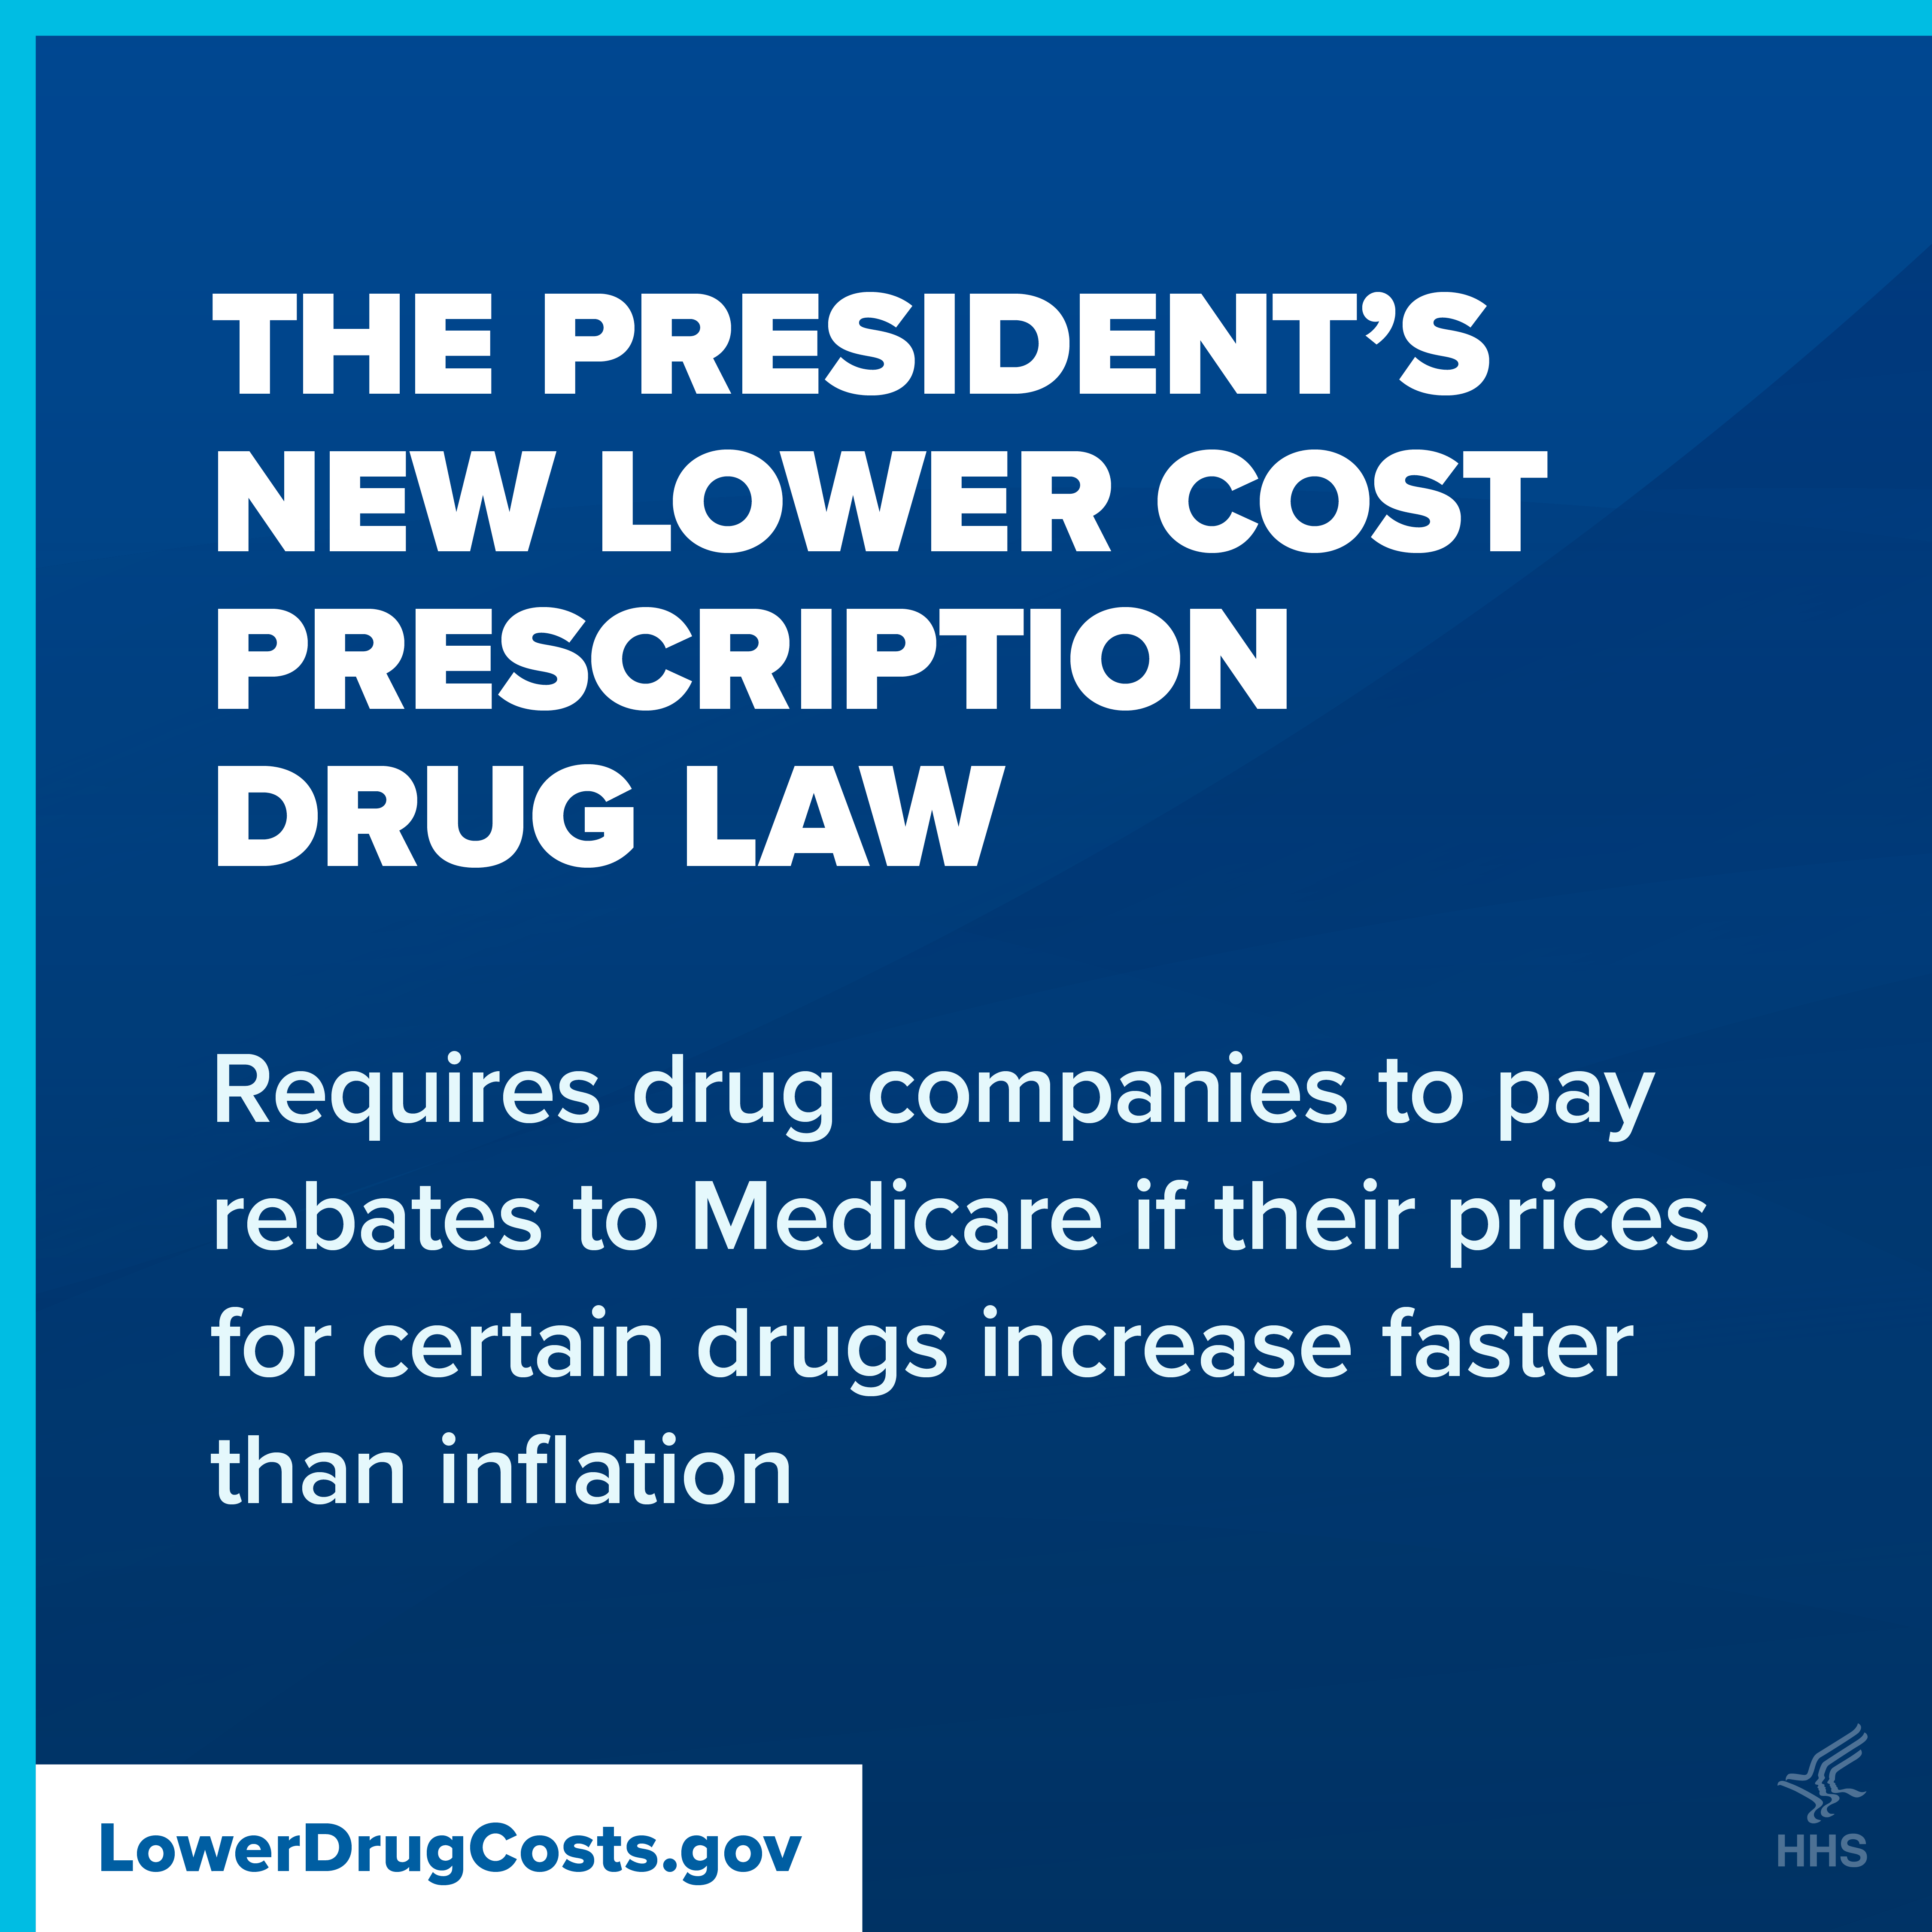 The President’s New Lower Cost Prescription Drug LawRequires drug companies to pay rebates to Medicare if they increase prices faster than inflation